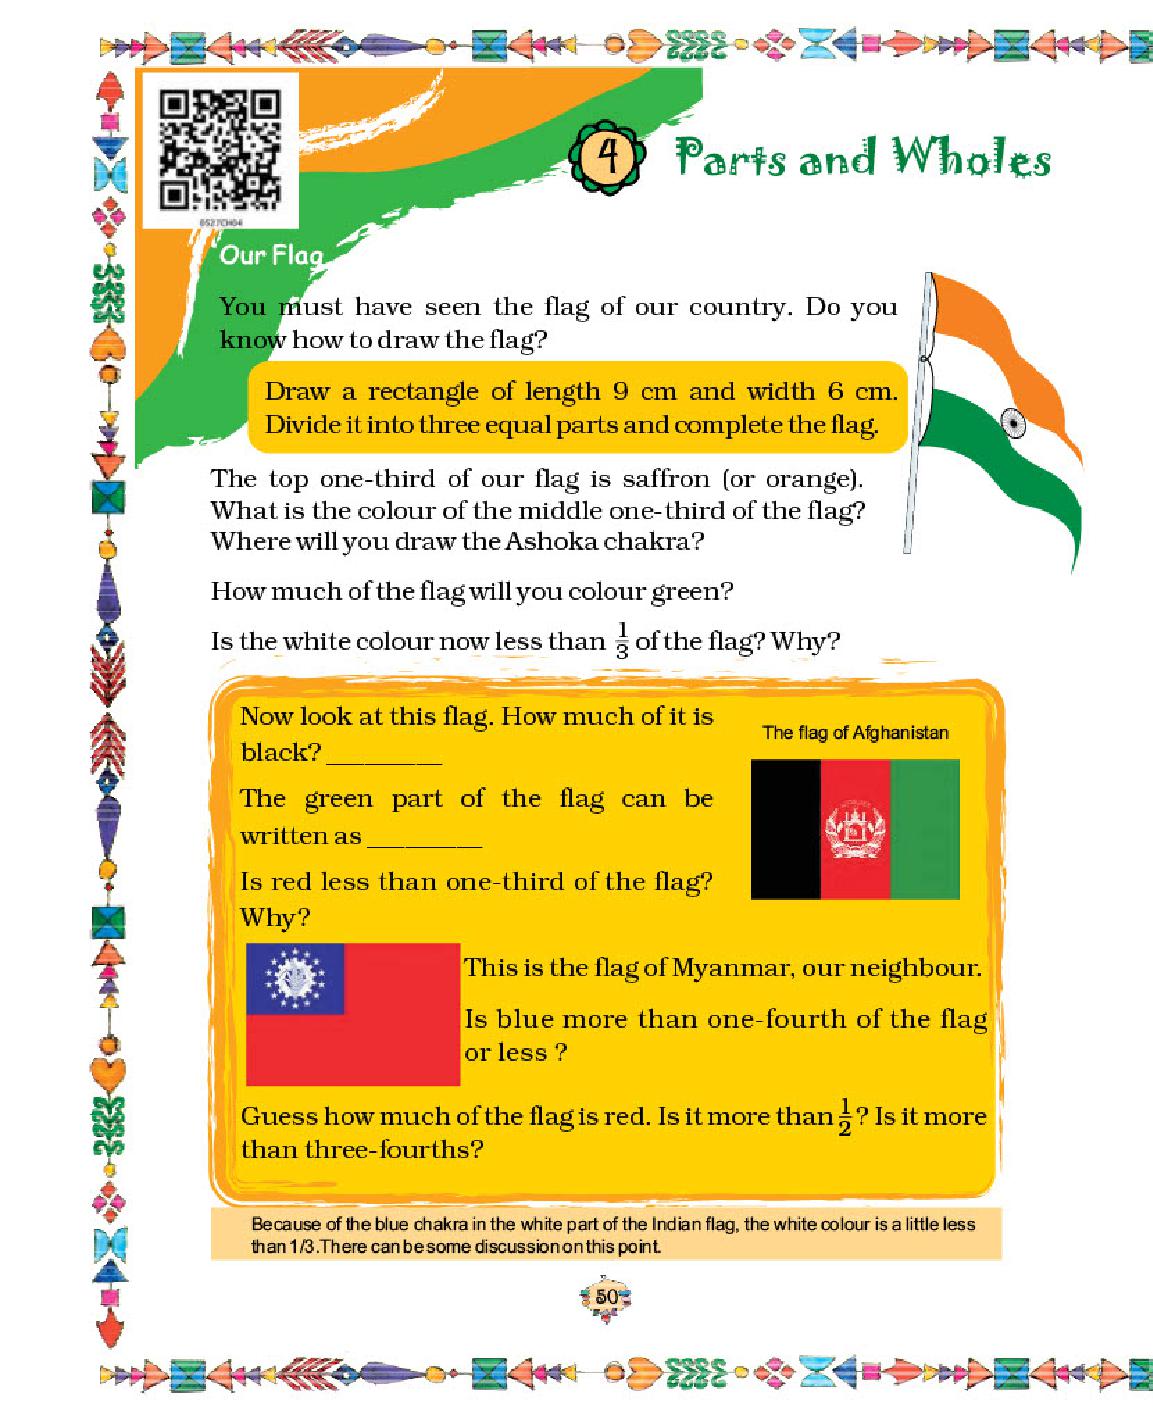 NCERT Book Class 5 Maths Chapter 4 Parts and Wholes - Page 1